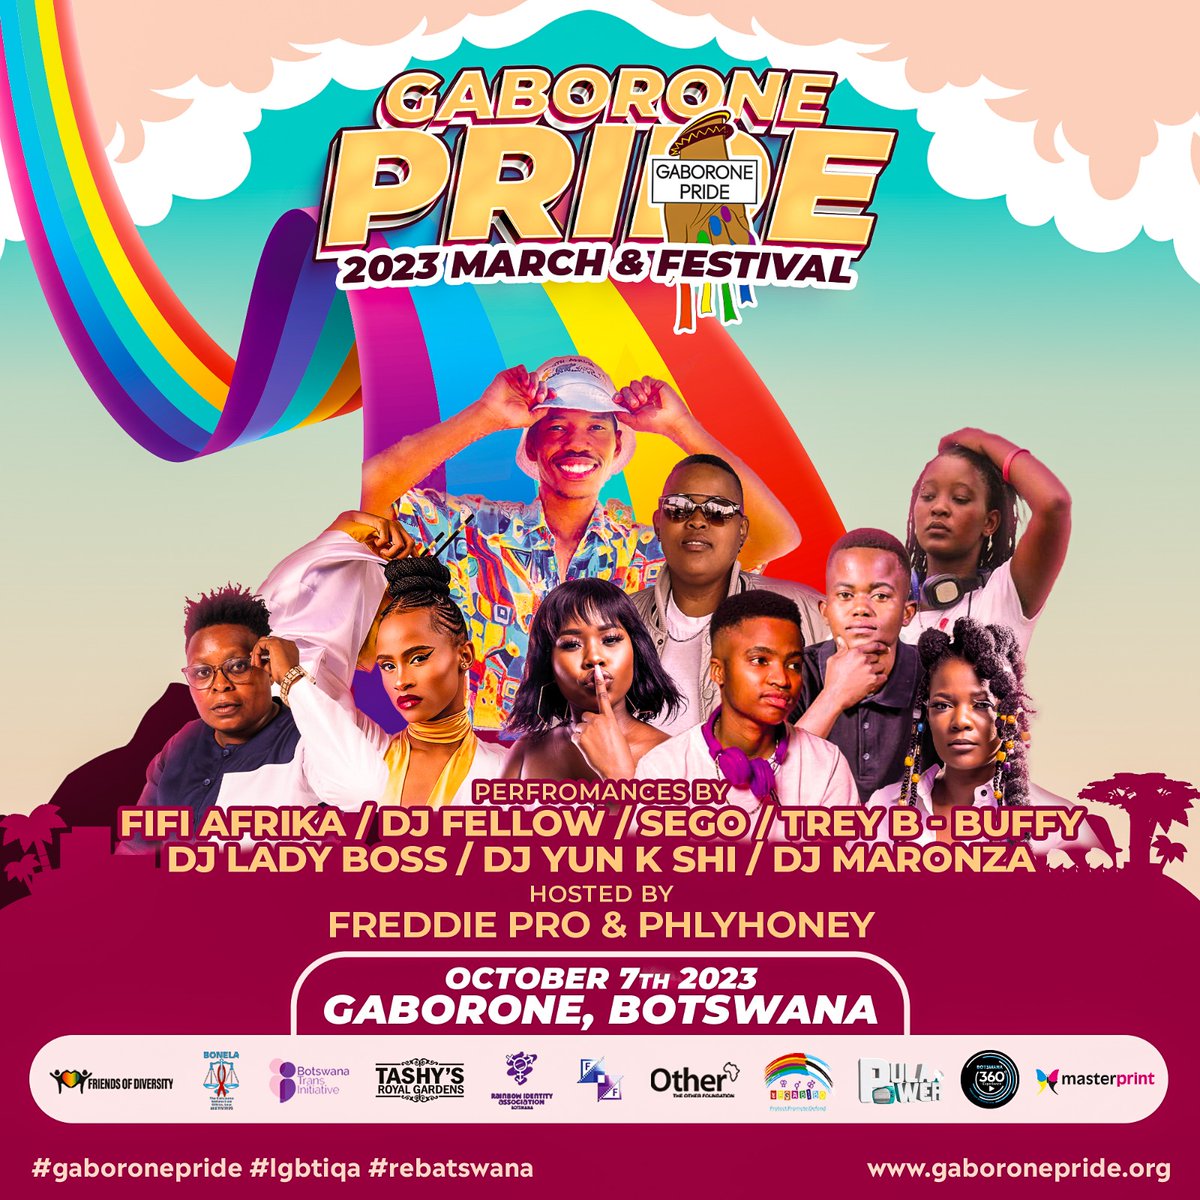 Good Evening everyone,

We have received many questions about the upcoming Gaborone Pride. Please note Below.

1. The Pride is a Free event for All (No tickets 🎟️ are needed to attend.

#GaboronePride #MindsetChange  #ReBatswana #LGBTIQRights